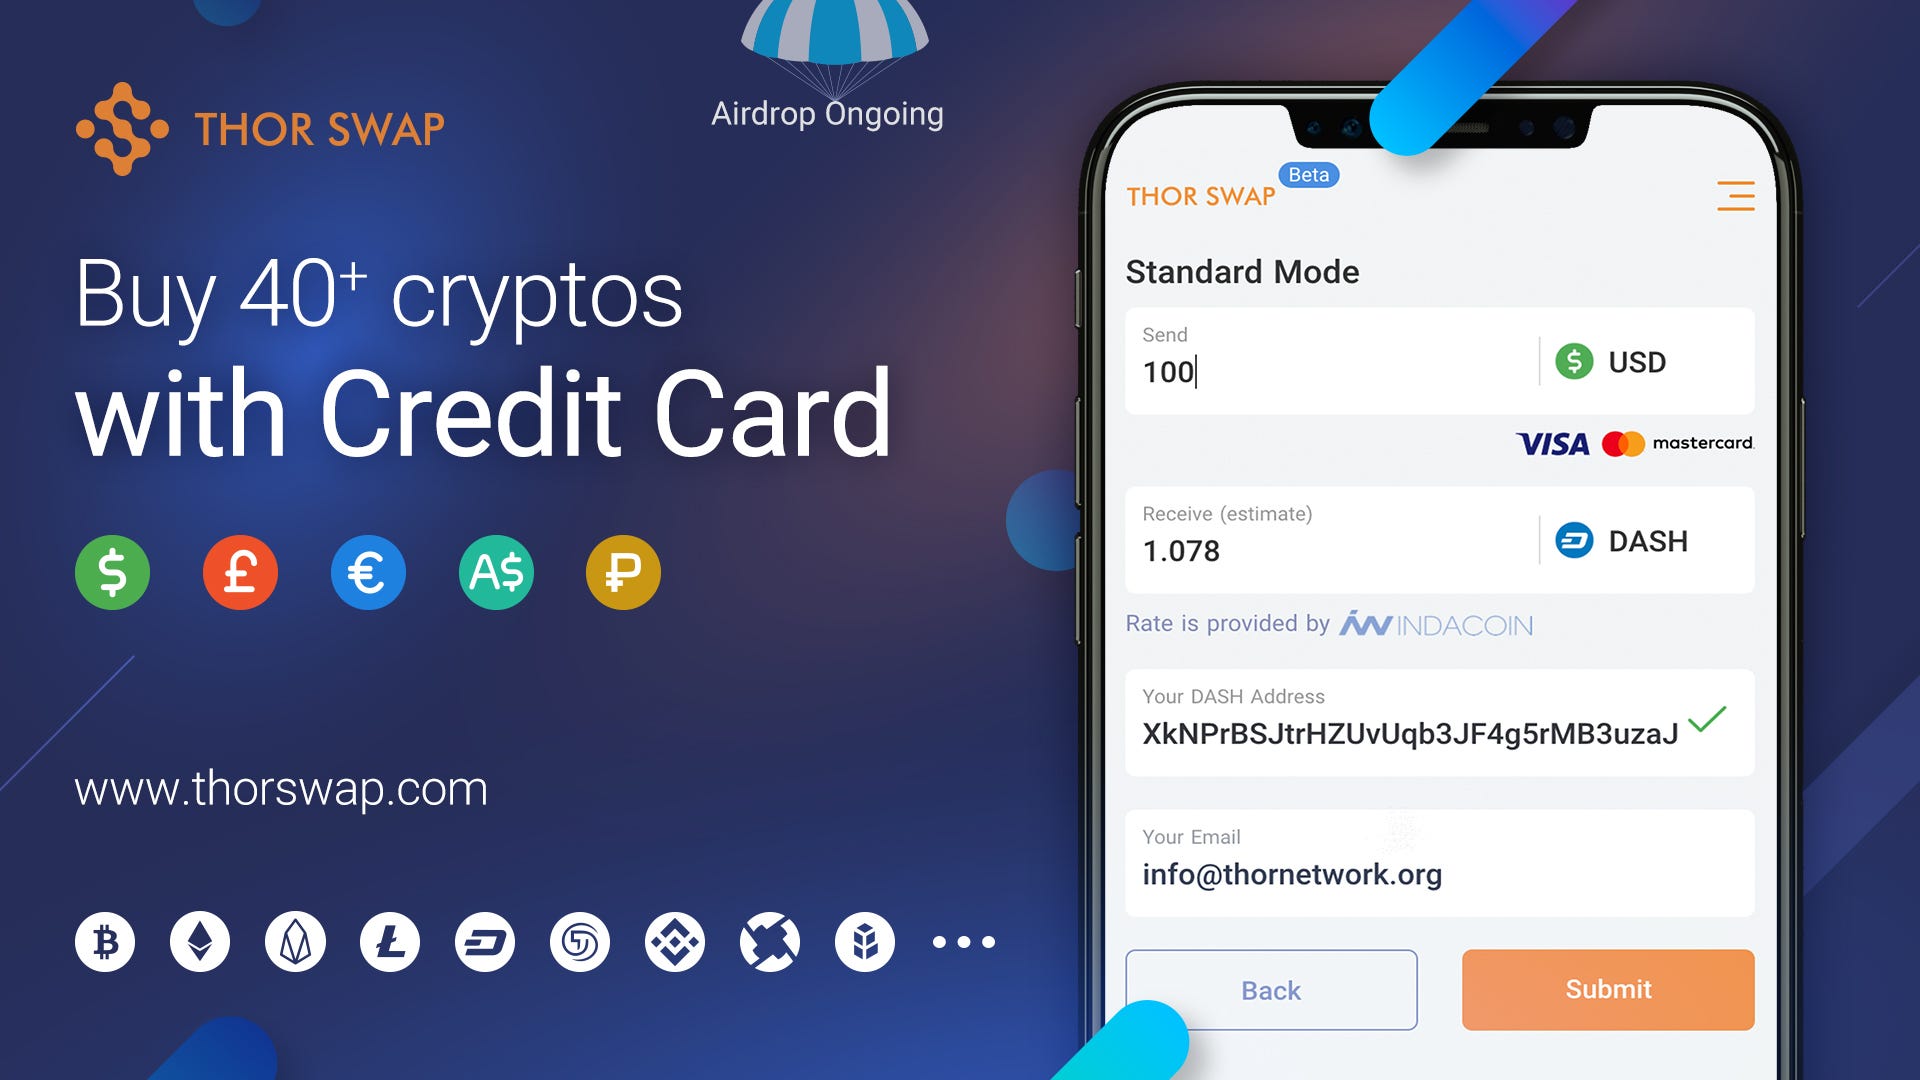 Buy Cryptocurrency With Credit Card On Thor Swap By Leo Xie Thor Network Blog Medium